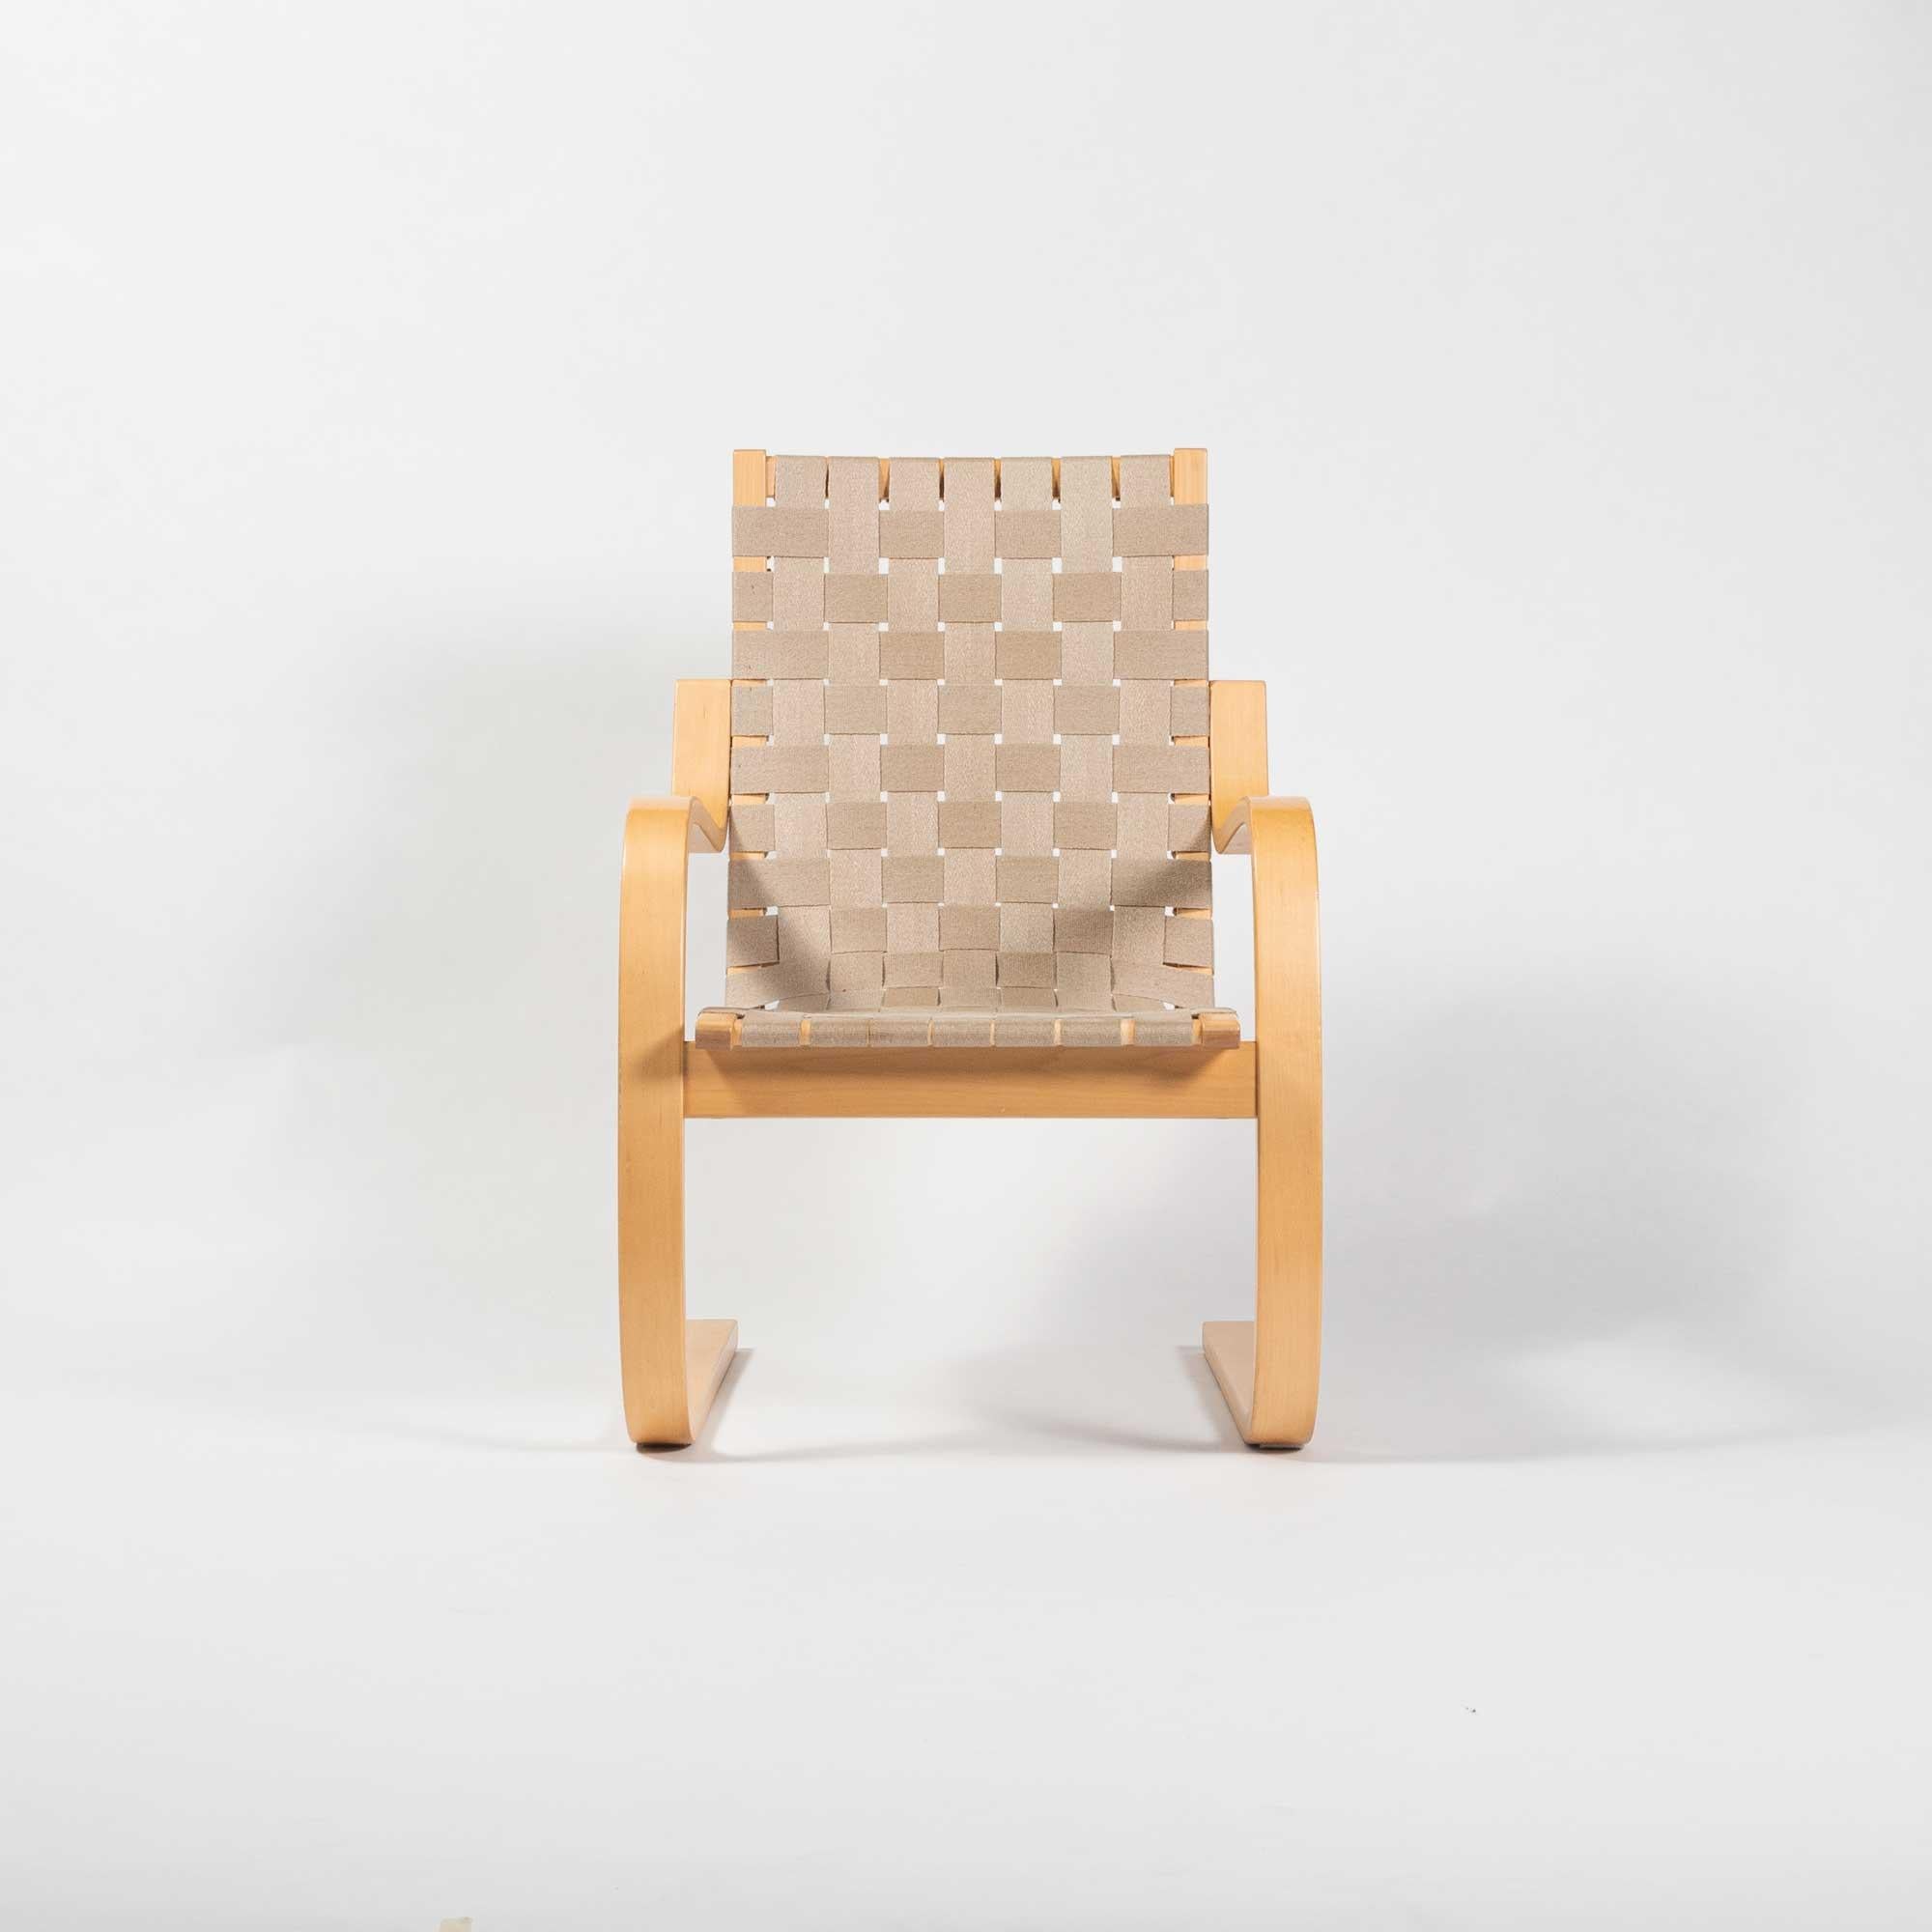 2005 production Armchair 406 by Alvar Aalto for Artek in birch and natural webbing. This was affectionately nicknamed 